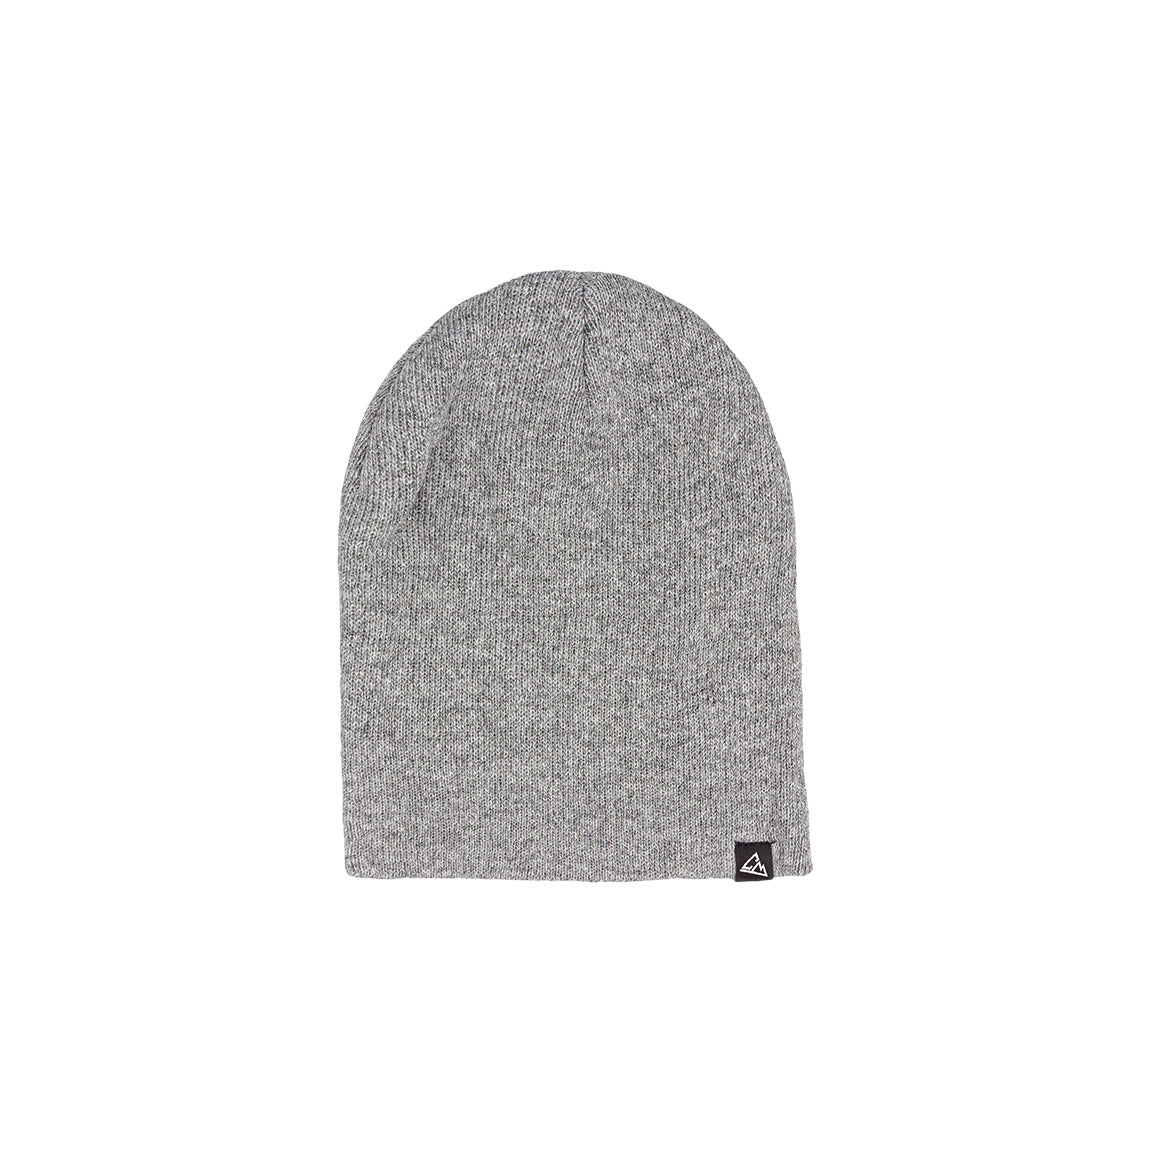 This image shows a plain gray knitted beanie, featuring a fine texture and adorned with a small triangular logo on the side.